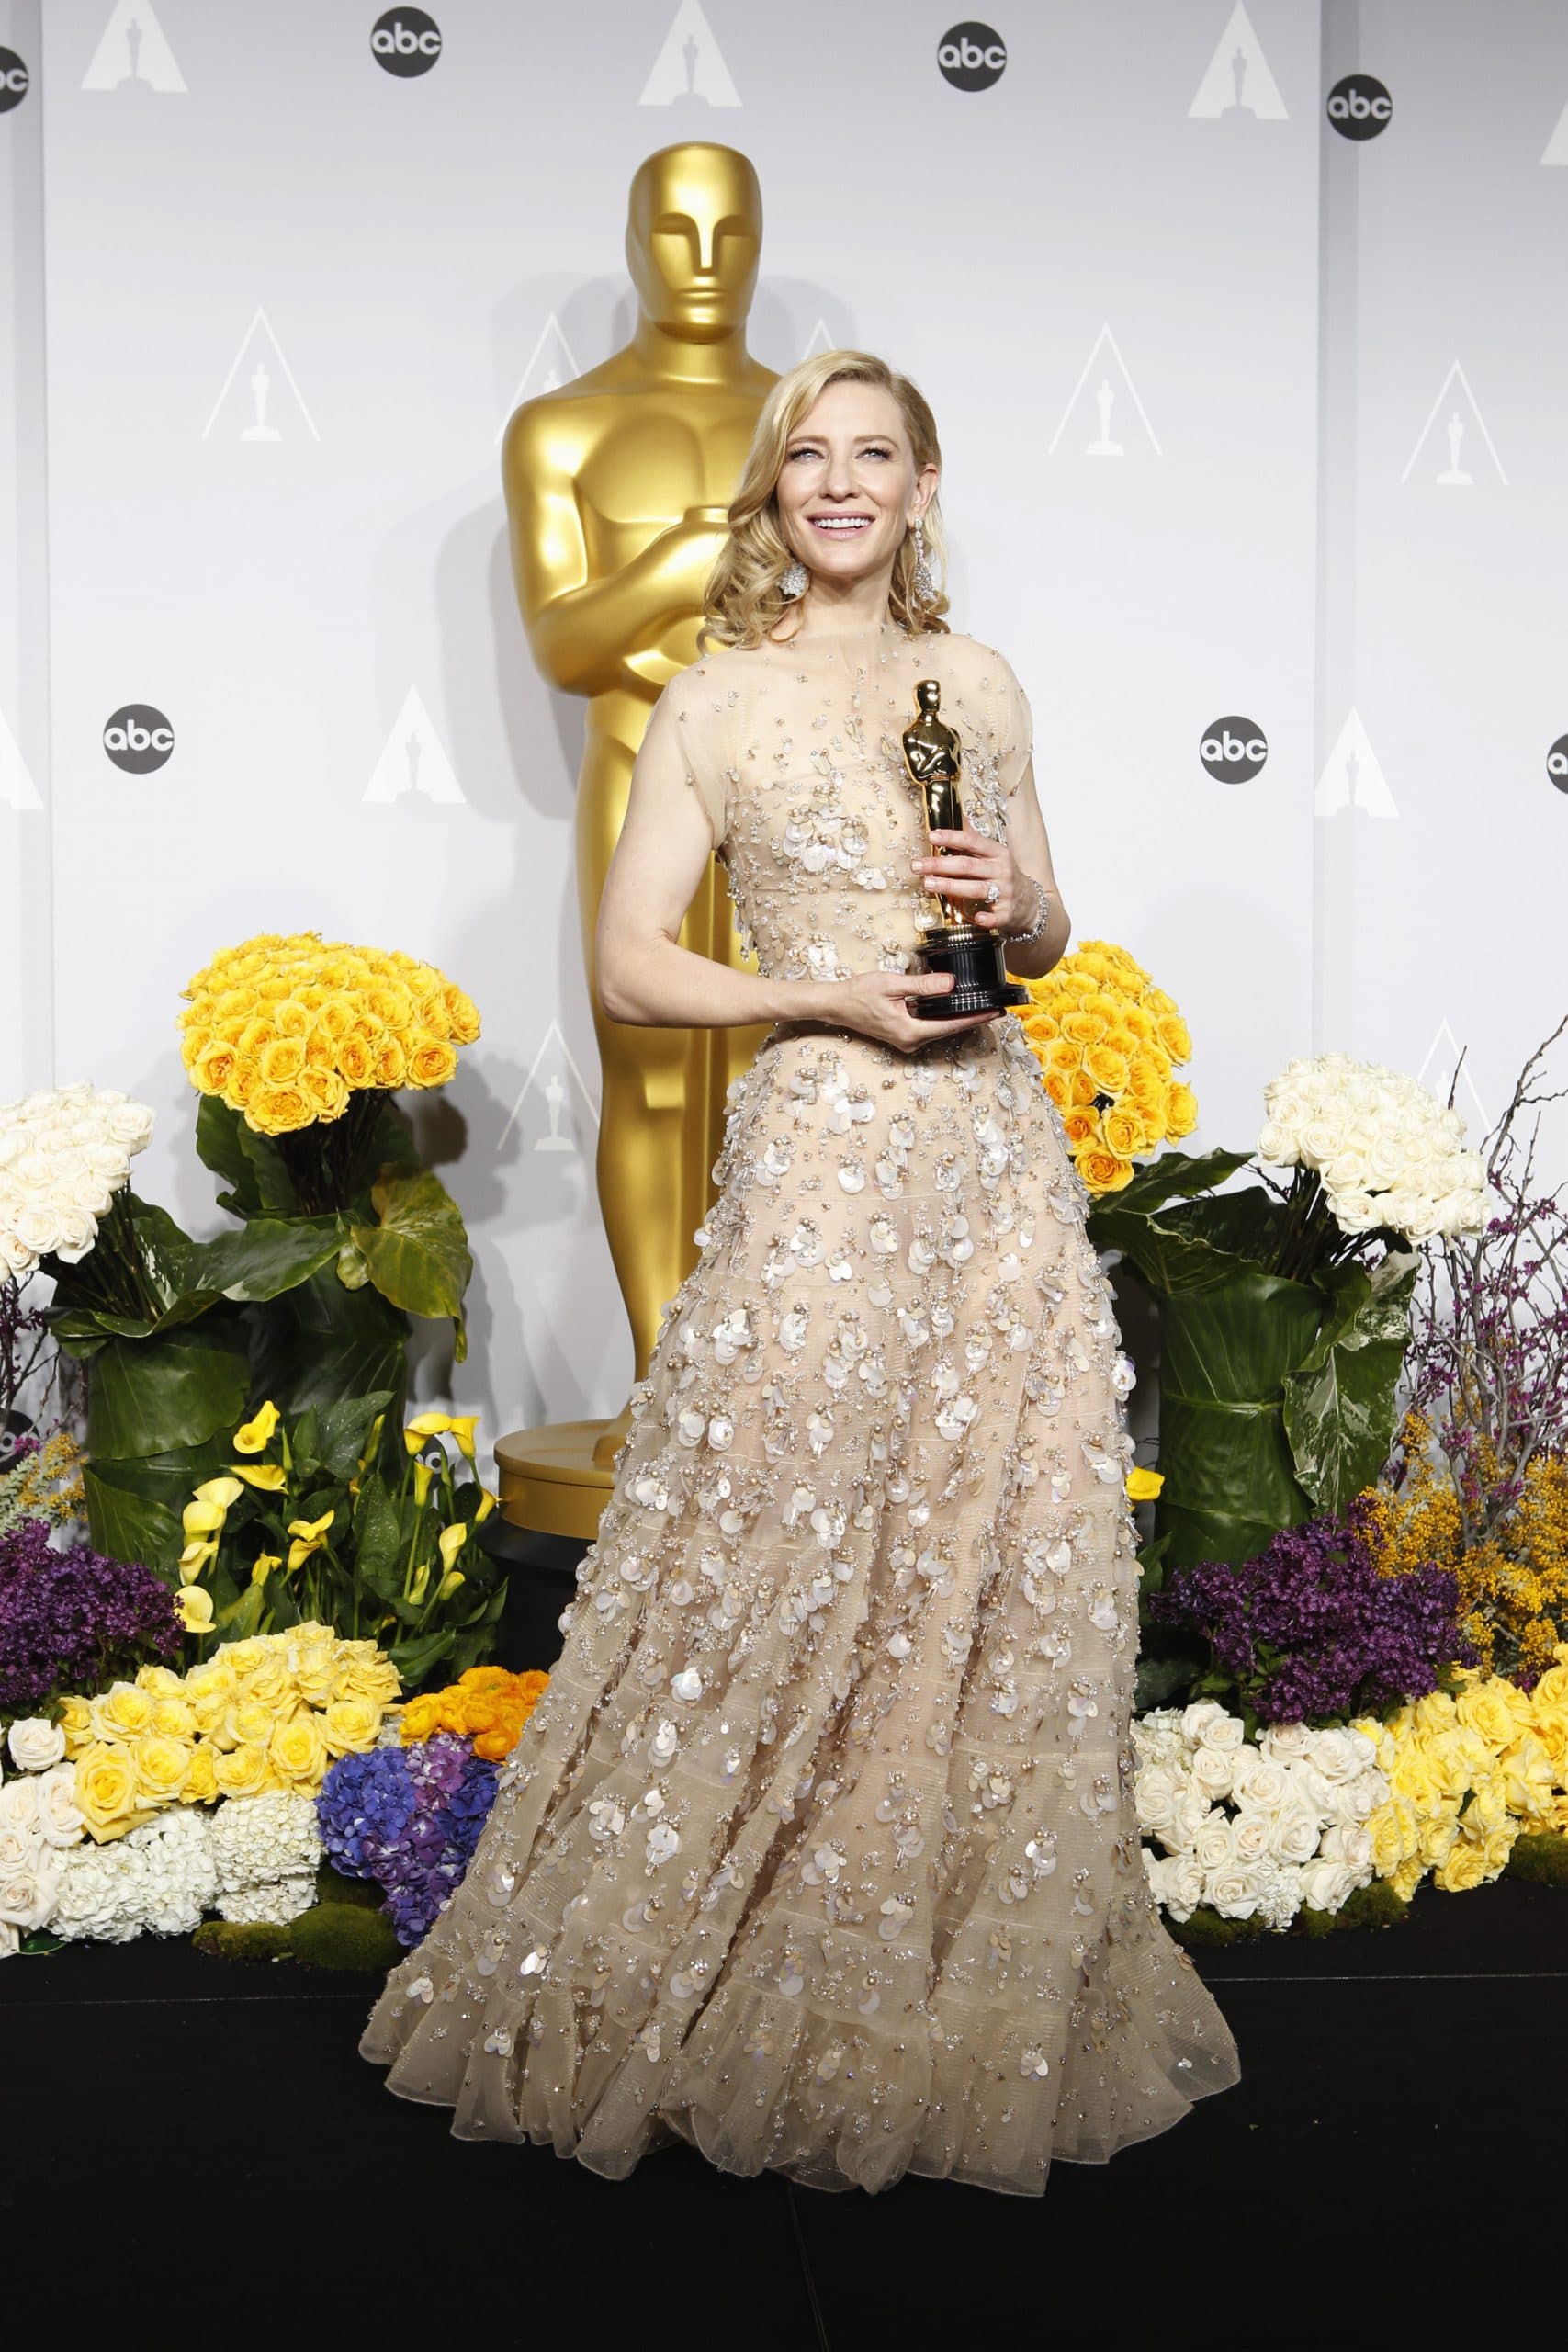 THE OSCARS(r) - PRESS ROOM - The Academy Awards(r) for outstanding film achievements of 2013 will be presented on Oscar Sunday, MARCH 2 (8:00-11:00 p.m., ET/5:00-8:00 p.m., PT), at the Dolby Theatre(r) at Hollywood &amp; Highland Center(r) and televised live on the Disney General Entertainment Content via Getty Images Television Network.  (Photo by Rick Rowell/Disney General Entertainment Content via Getty Images)
CATE BLANCHETT